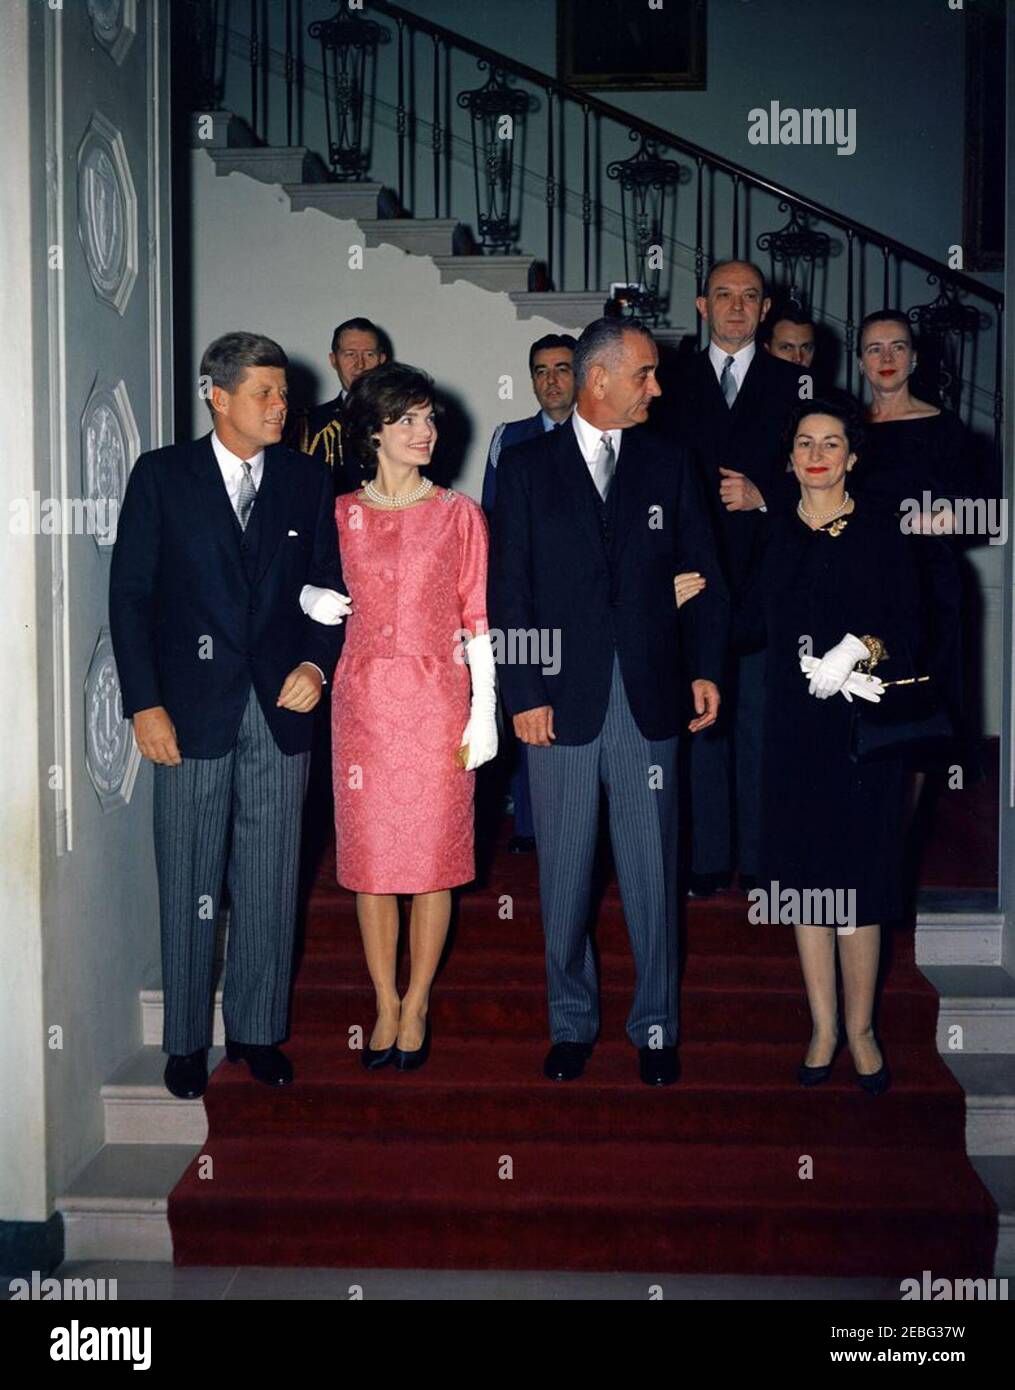 Reception for members of the Diplomatic Corps, 5:00PM. Reception for members of the Diplomatic Corps, White House, Washington, D.C. President John F. Kennedy and First Lady Jacqueline Kennedy, with Vice President Lyndon B. Johnson and Lady Bird Johnson, descend the Grand Staircase to the Entrance Hall. Behind them (L-R) are Military Aide to the President General Chester V. Clifton; Air Force Aide to the President General Godfrey McHugh; Secretary of State Dean Rusk; Naval Aide to the President Commander Tazewell Shepard, Jr. (partially hidden); Dean Rusku0027s wife Virginia Rusk. Stock Photo